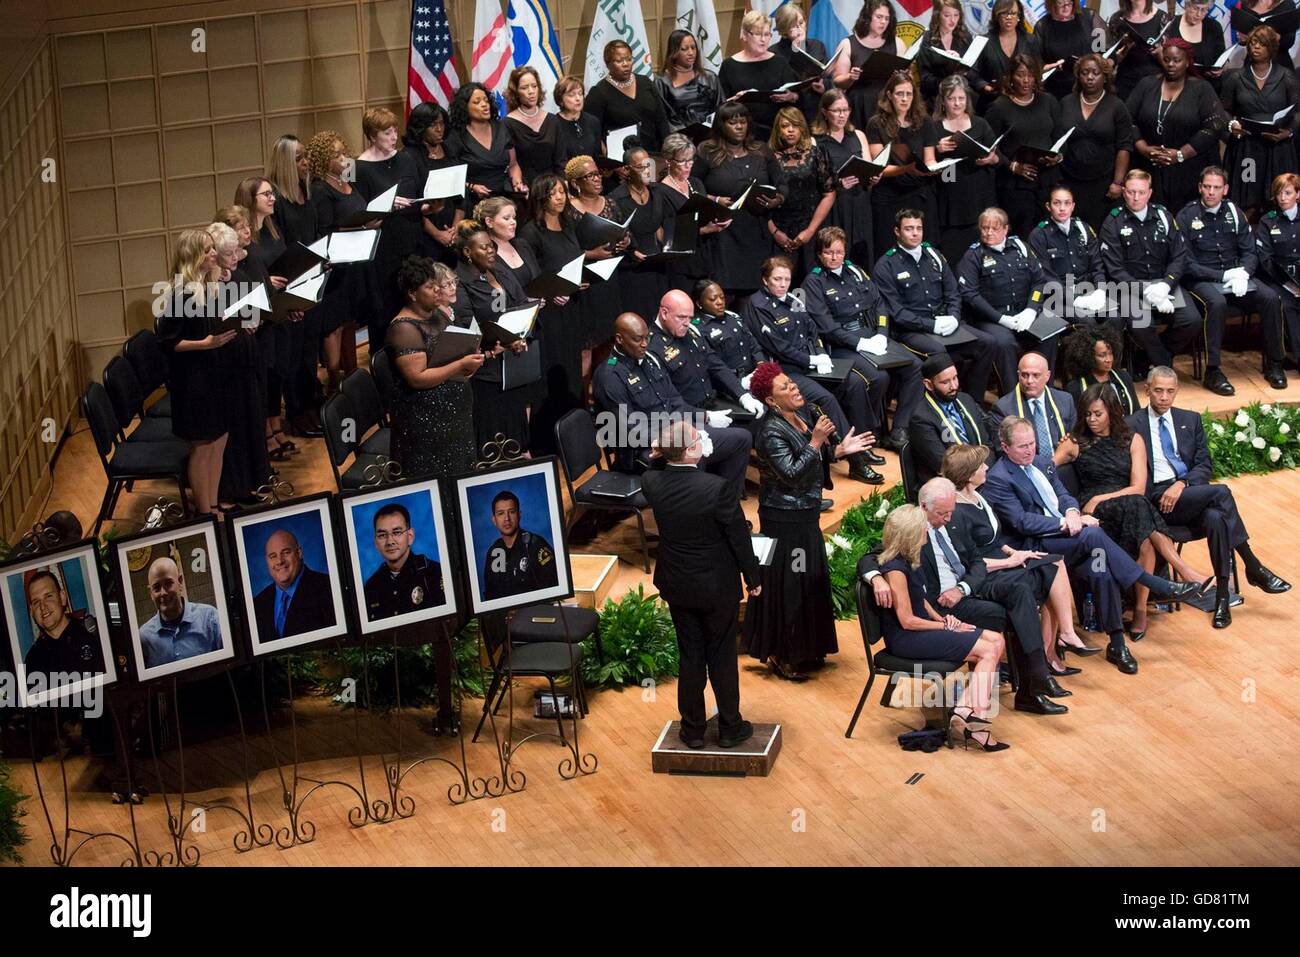 U.S President Barack Obama sits with First Lady Michelle Obama, former President George W. Bush and Laura Bush, Vice President Joe Biden and Dr. Jill Biden during a memorial service for the five police officers who were killed by a sniper during protests July 11, 2016 in Dallas, Texas. Stock Photo